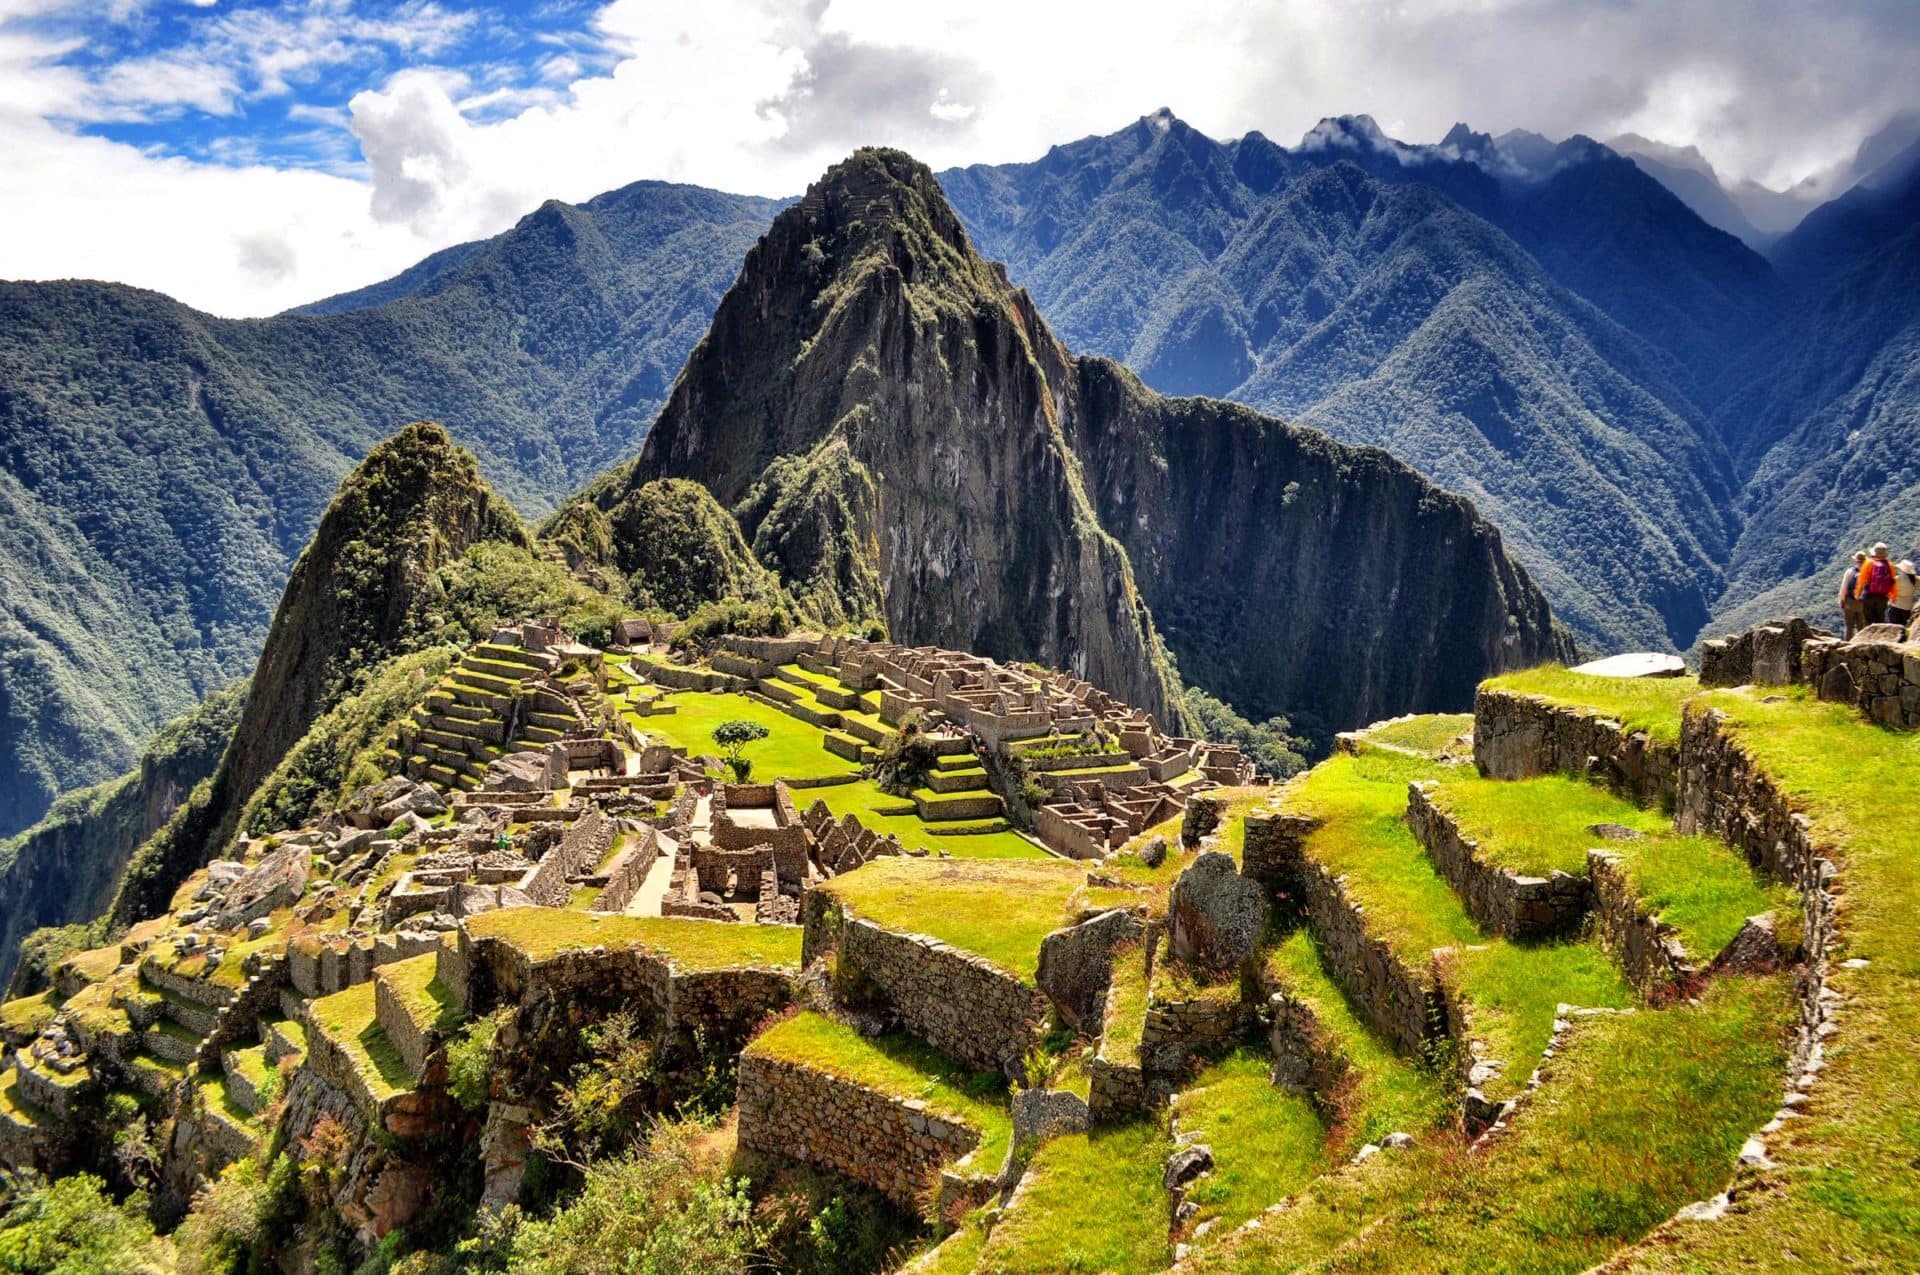 Machu Picchu, Peru: We find the “Lost City of The Incas” right where they left it.